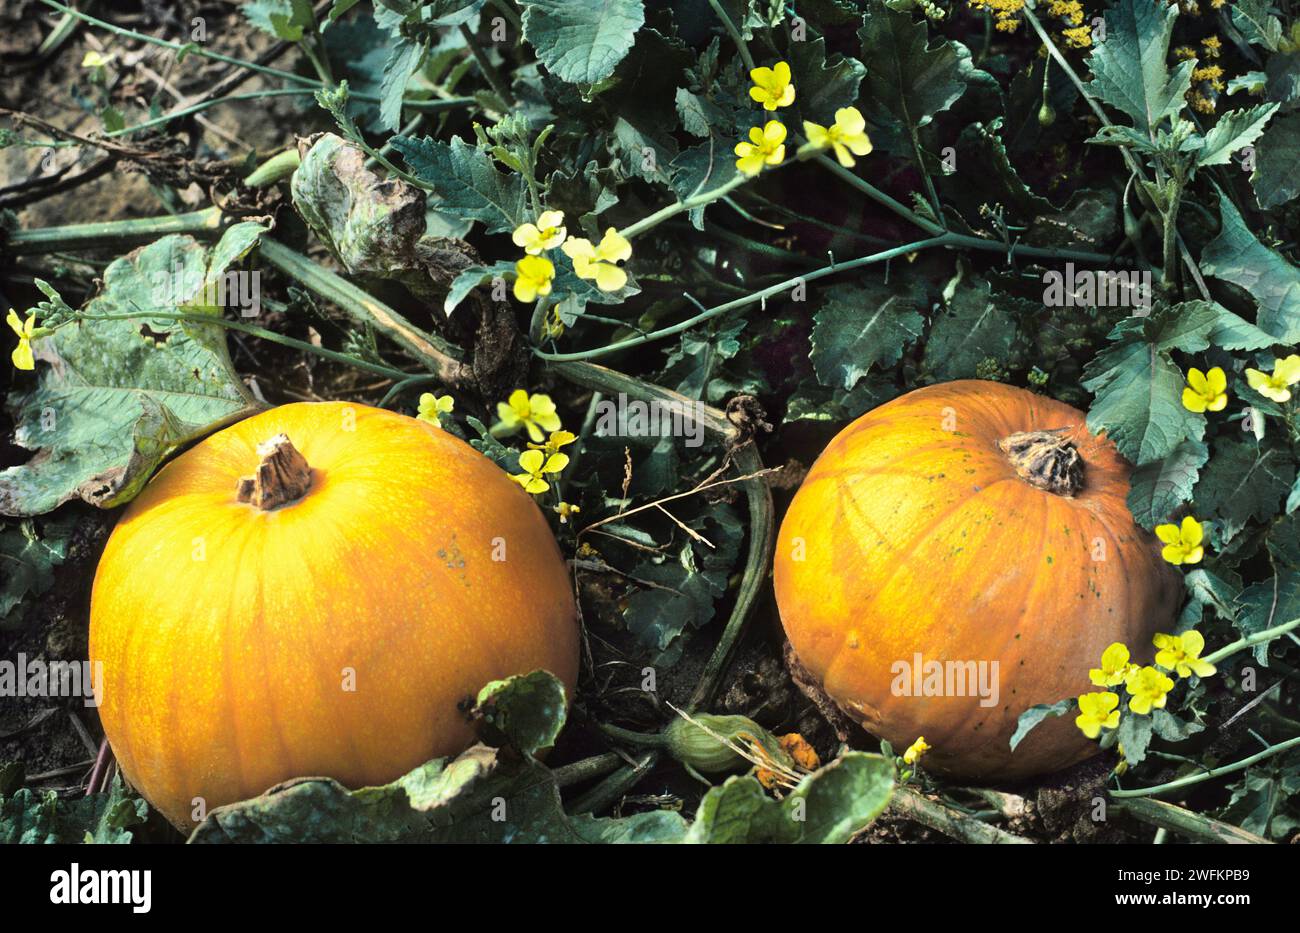 Pumpkins on the ground in a field. Pumpkin flowers. Pumpkin patch harvest in New England, USA Stock Photo